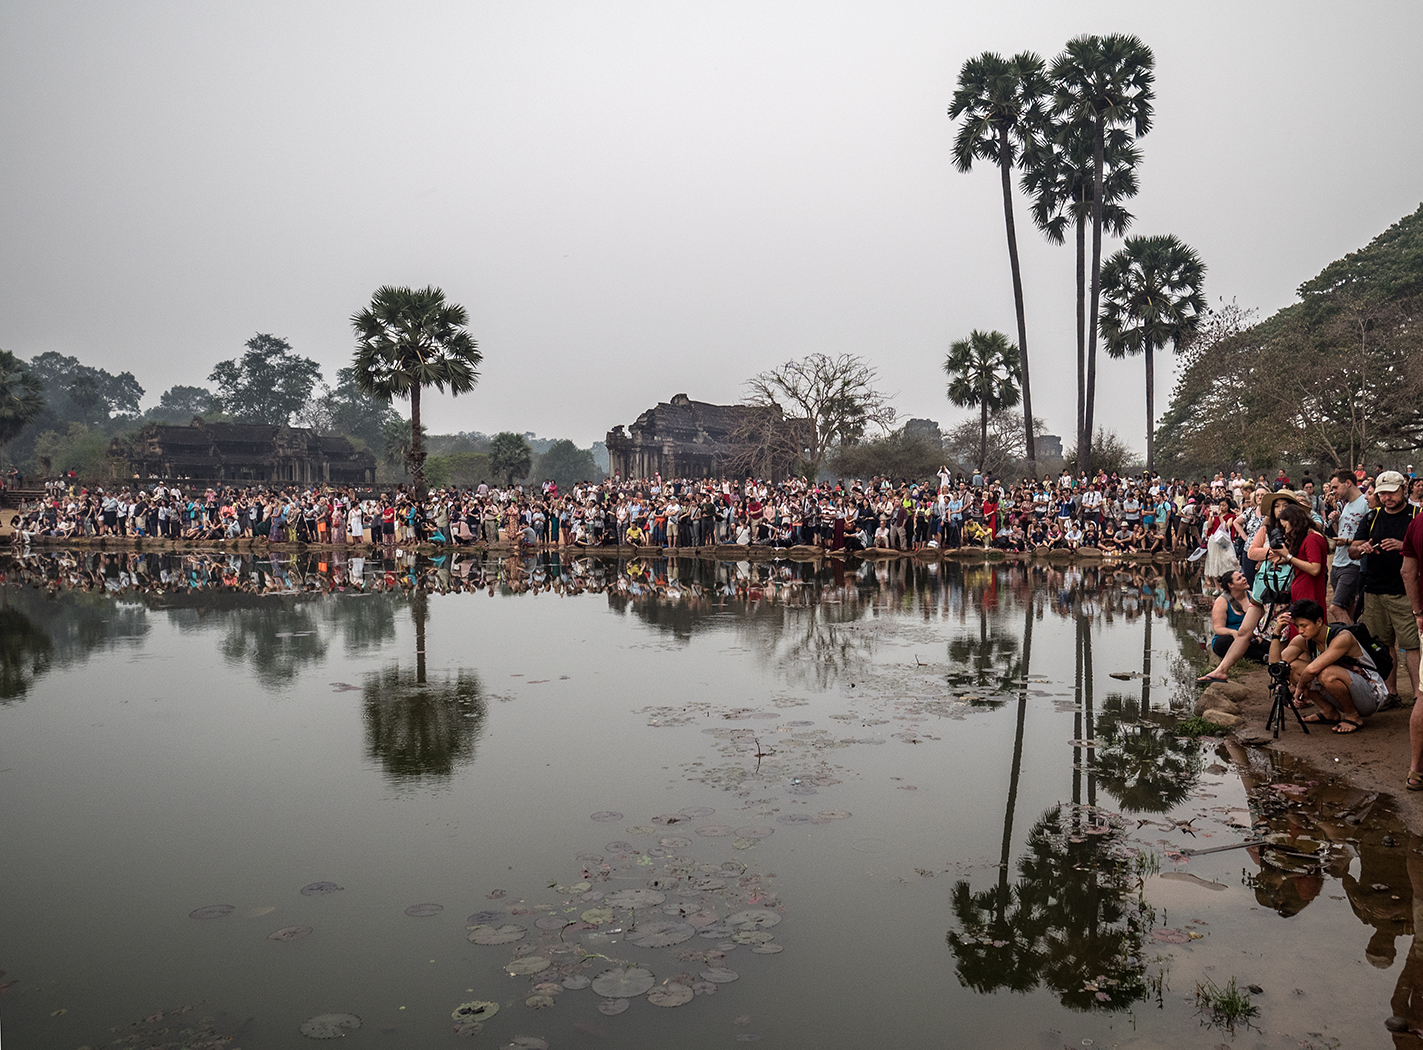 A few of our new 500 best friends who joined us for sunrise over Angkor Wat